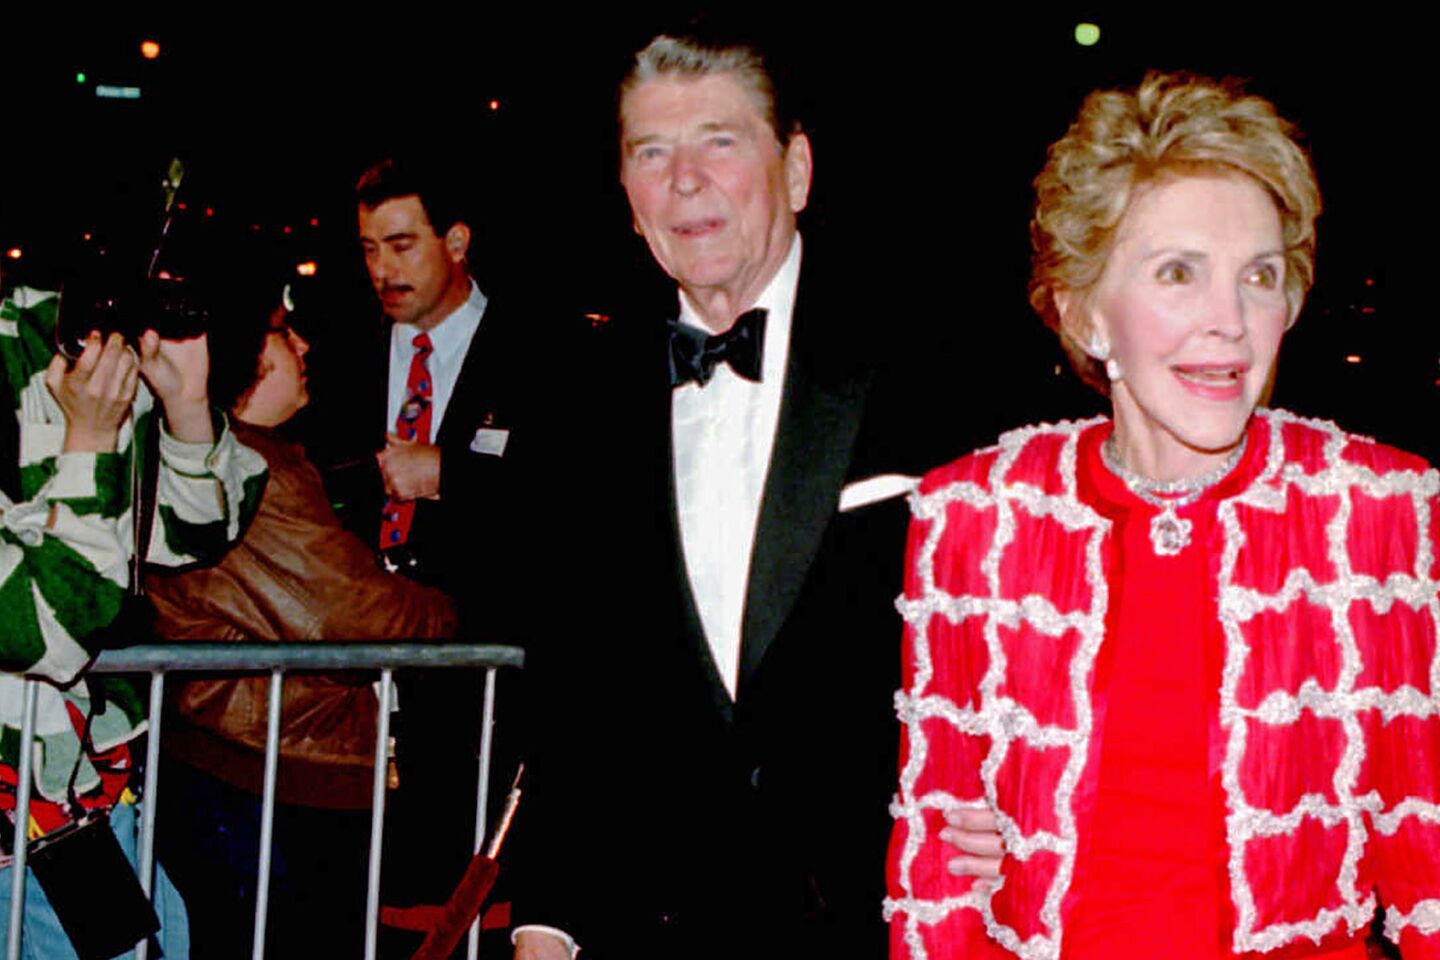 The former president and first lady arrive for the premiere of Andrew Lloyd Webber's "Sunset Boulevard" in Los Angeles in December 1993.